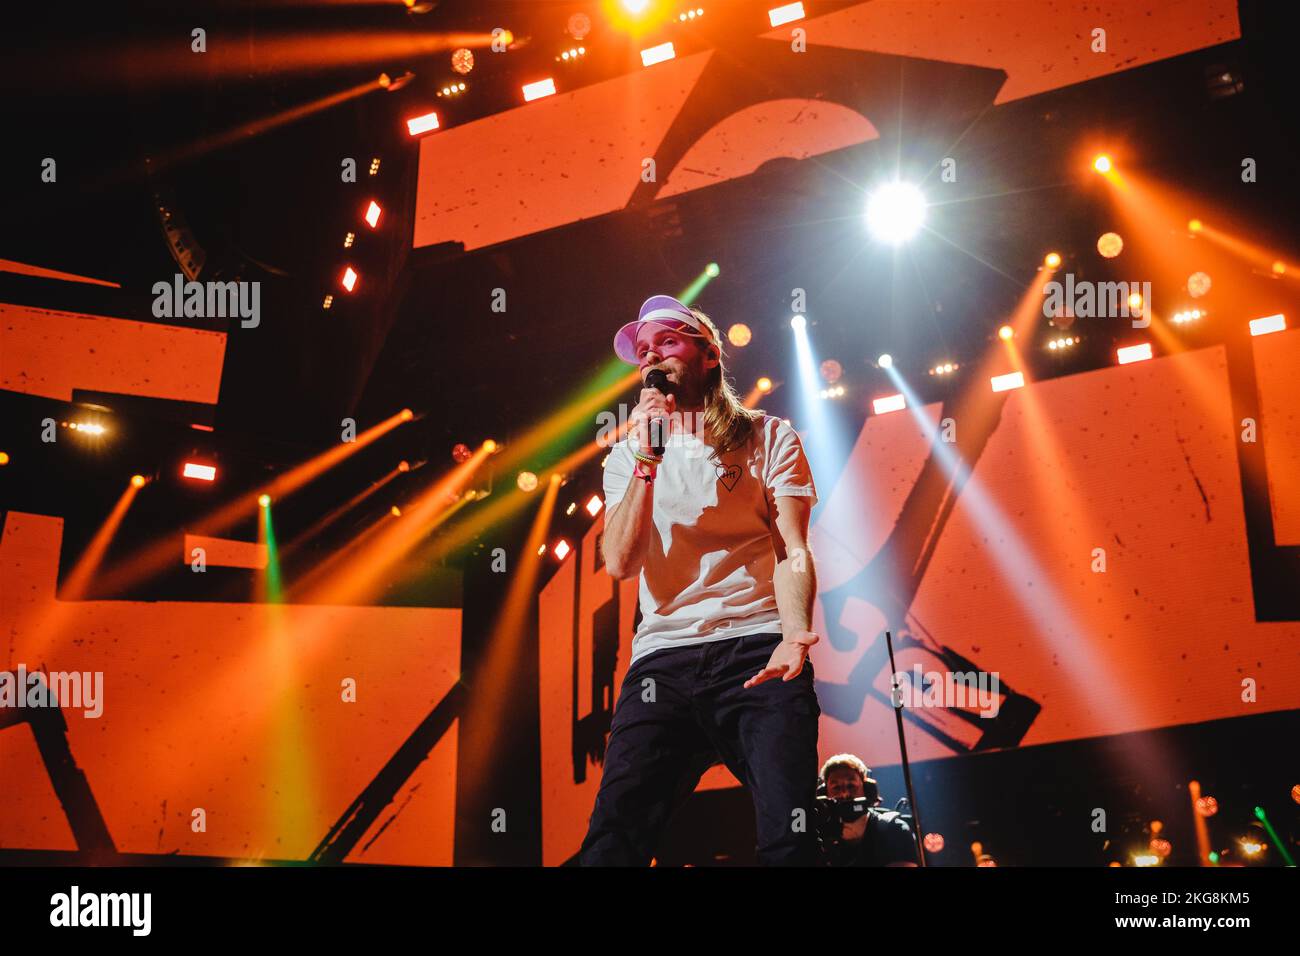 Zurich, Switzerland. 18th, November 2022. The German band Sportfreunde Stiller performs live during the Energy Star Night 2022 at the Hallenstadion in Zürich. Here singer and musician Peter Brugger is seen live on stage. (Photo credit: Gonzales Photo - Tilman Jentzsch). Stock Photo